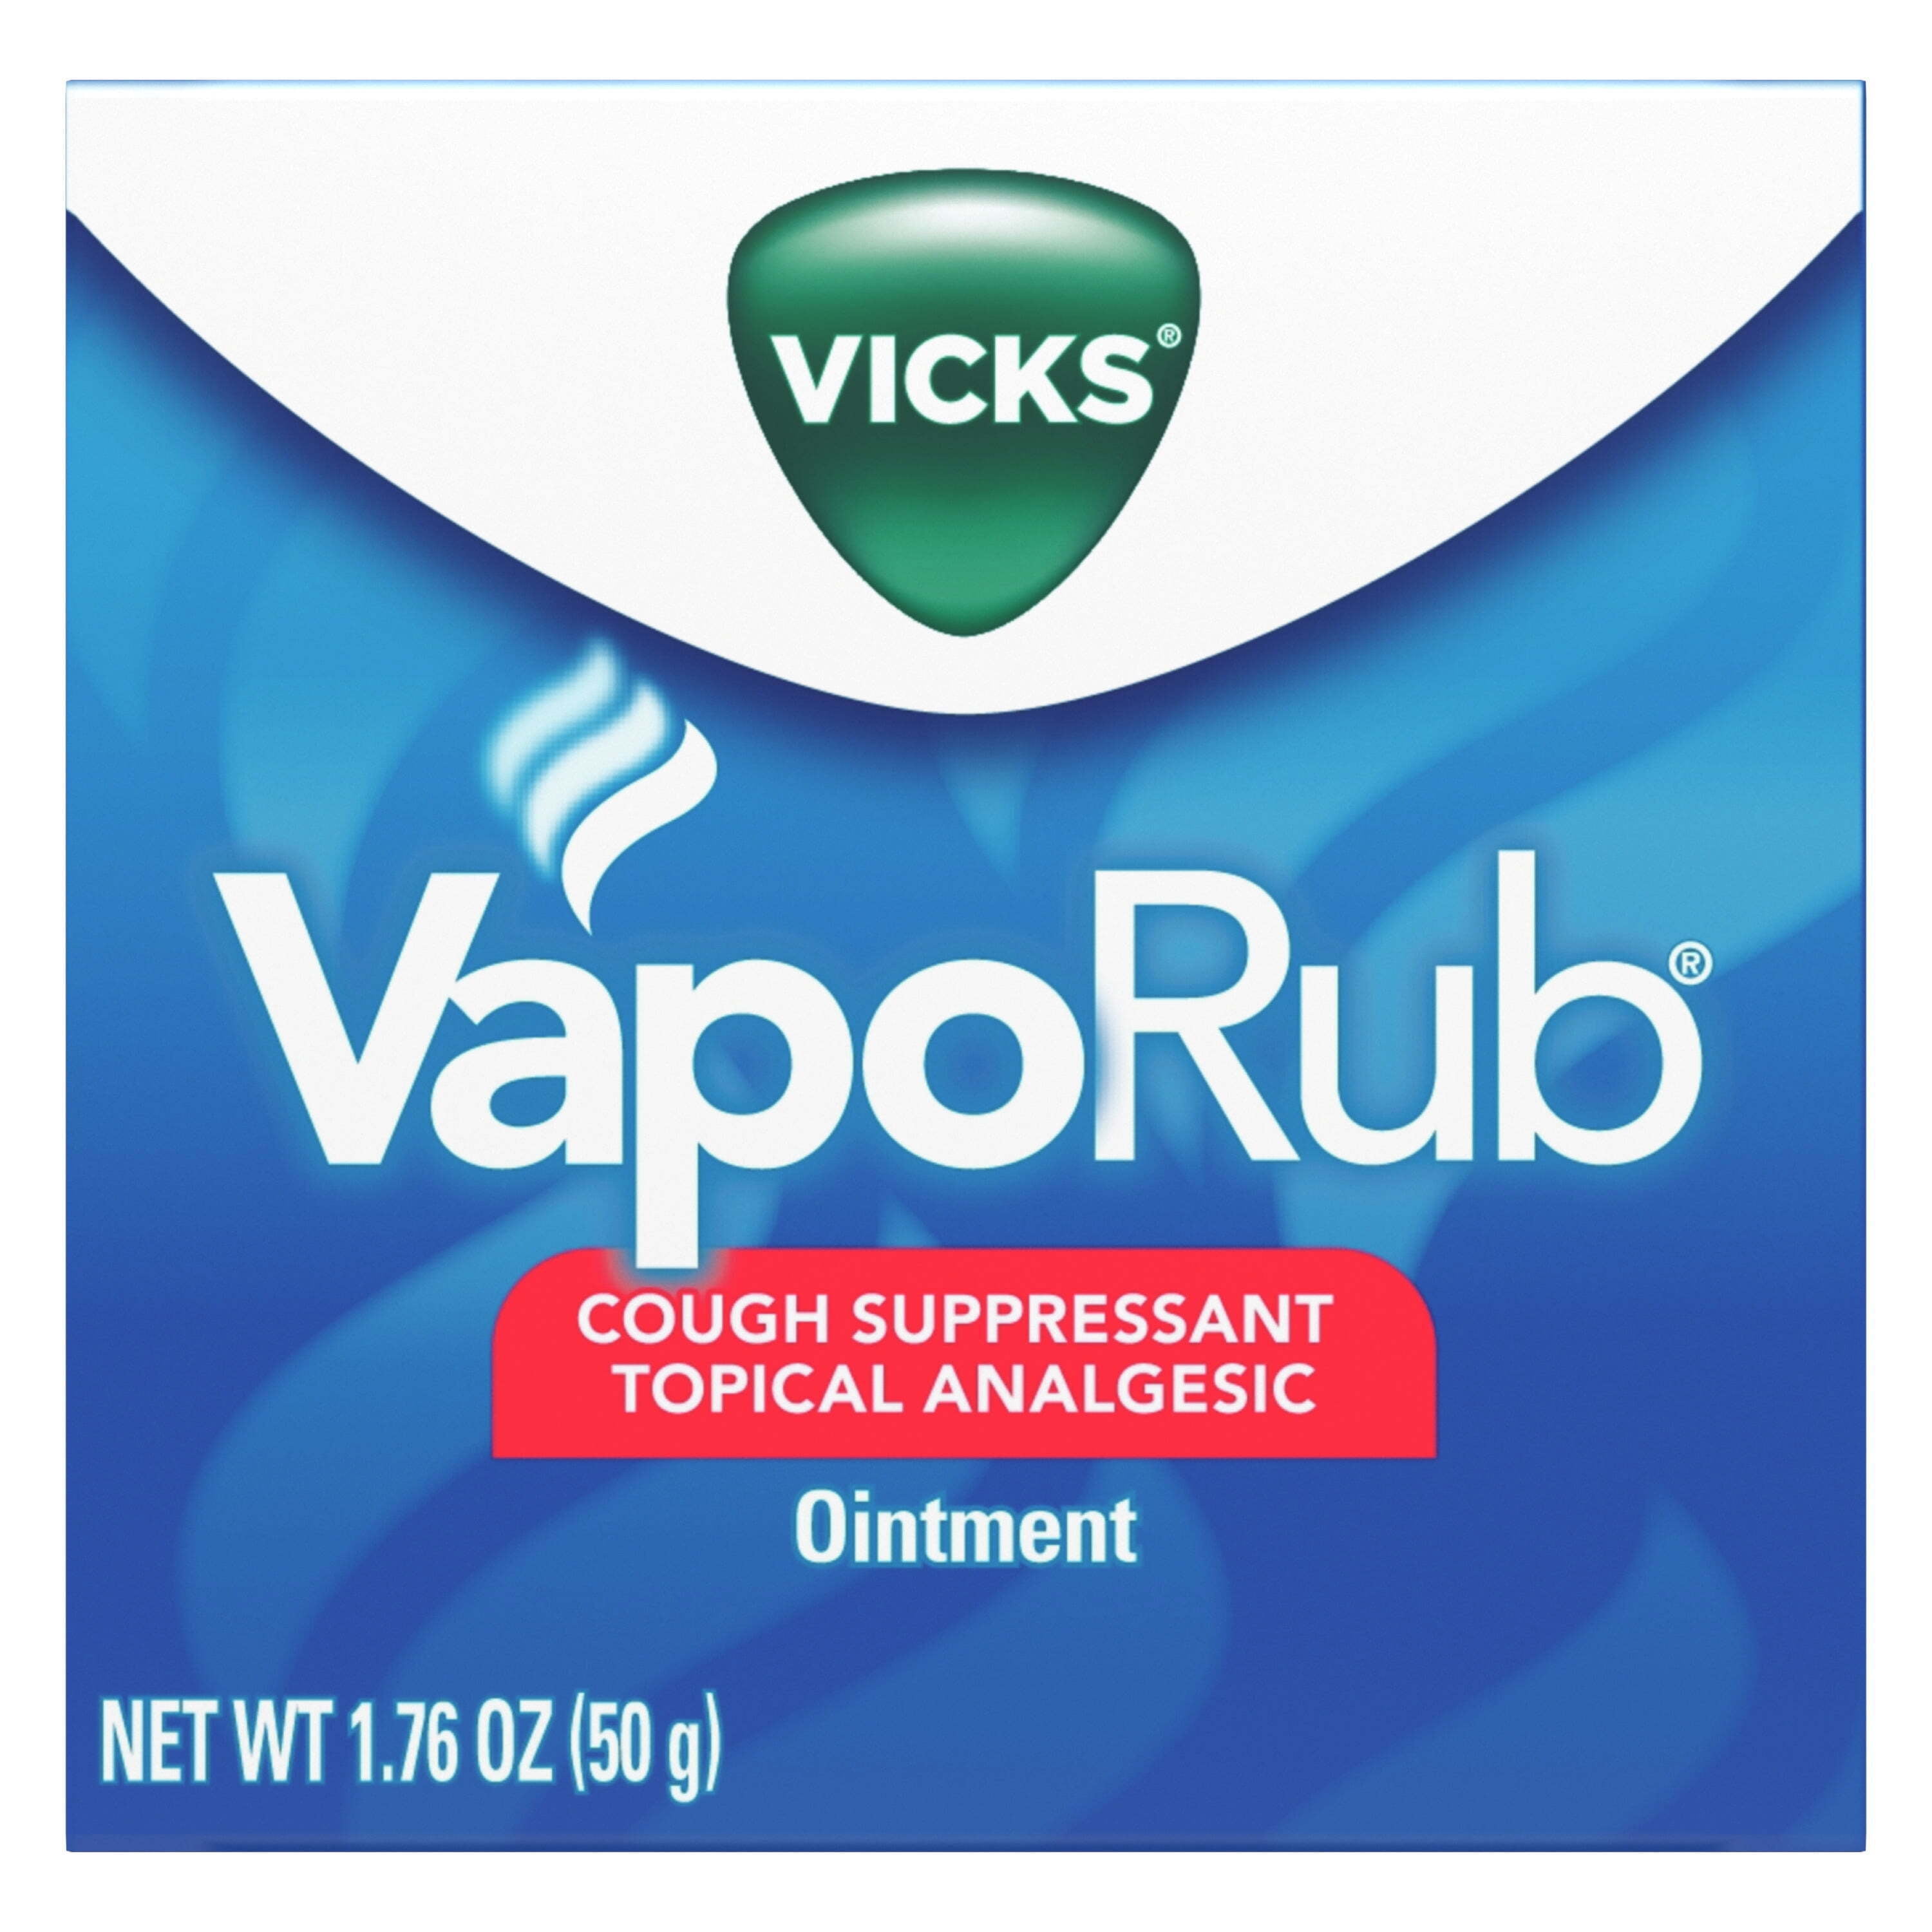 Vicks VapoRub Topical Cough Chest Rub & Analgesic Ointment,  over-the-Counter Medicine, 3.53 oz